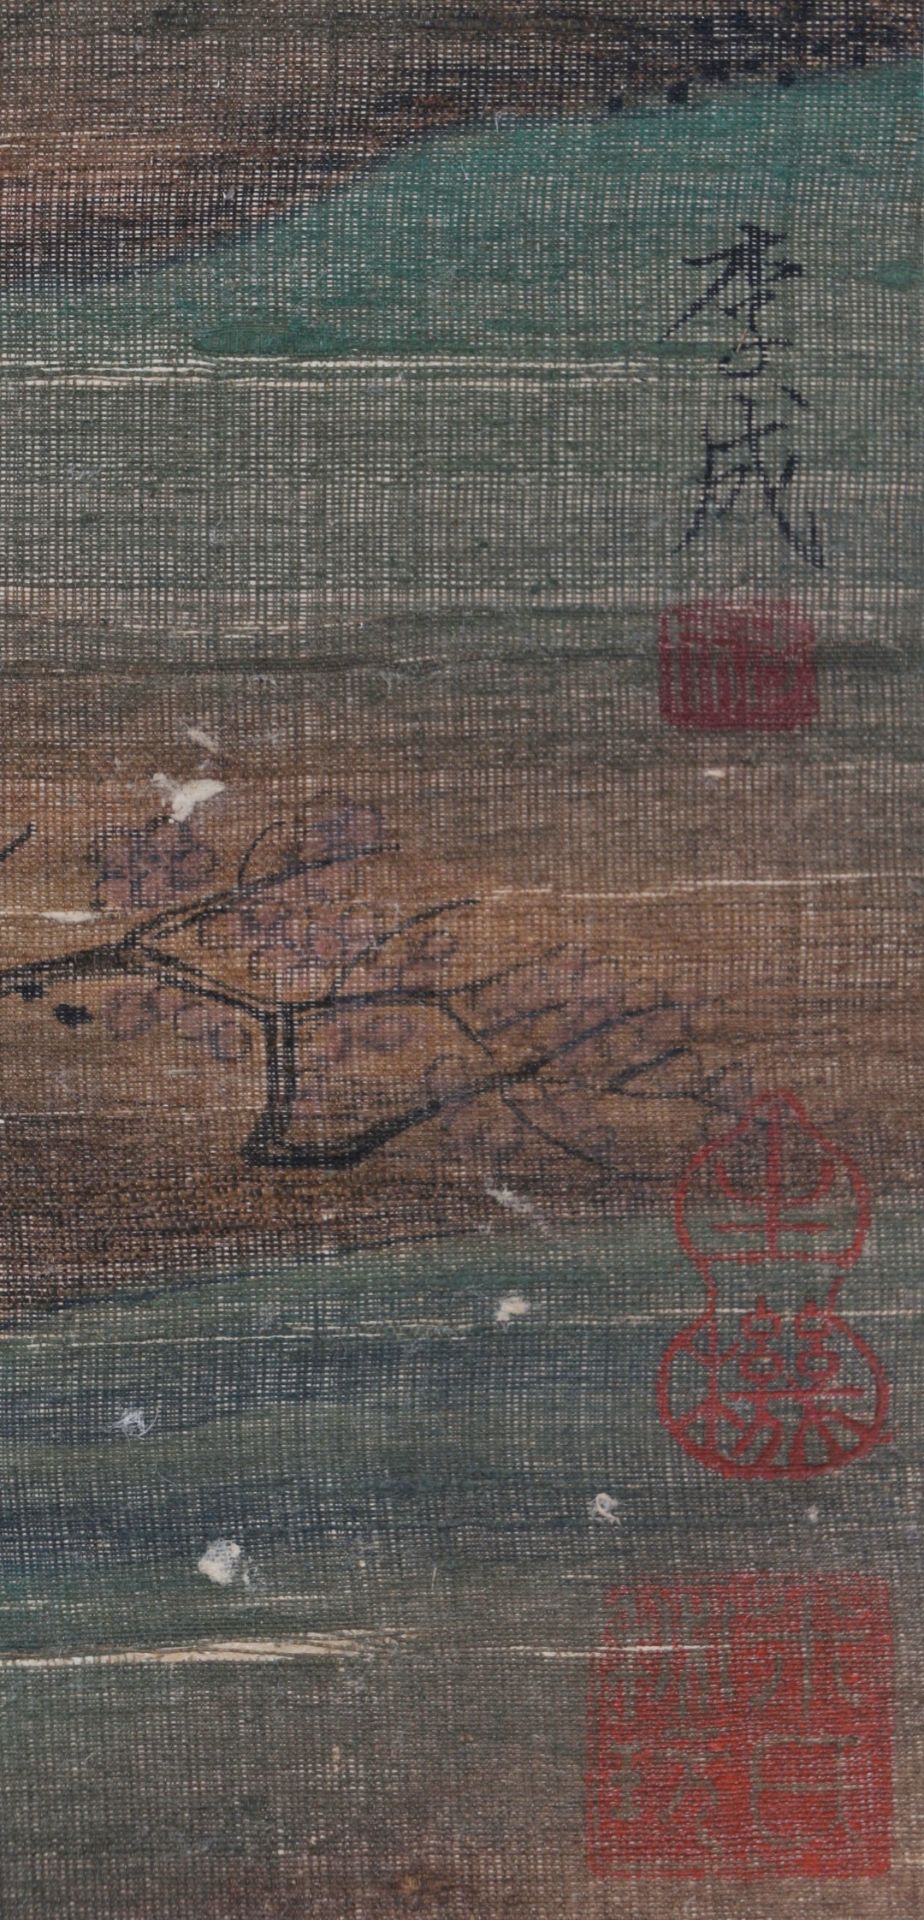 A Chinese Scroll Painting By Li Cheng - Image 7 of 13